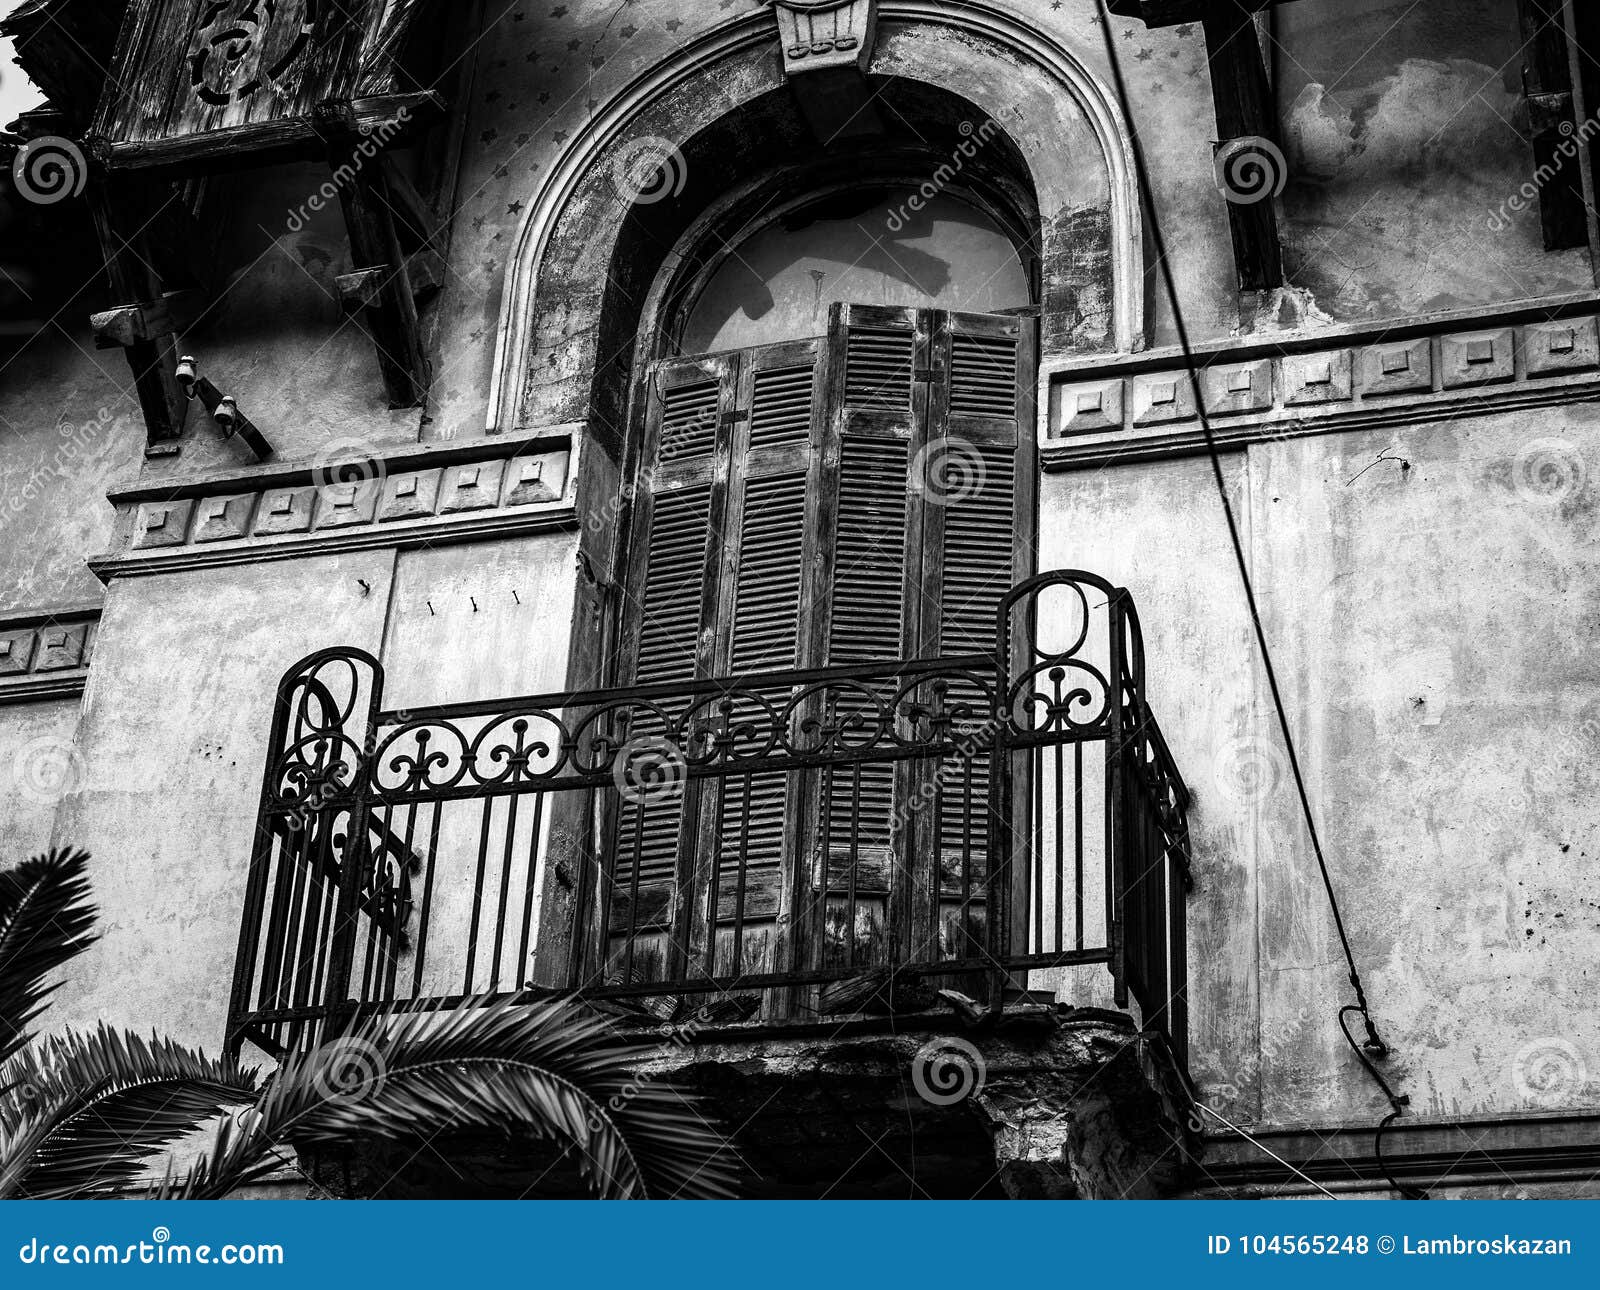 architeture details of abandoned hundred years old house, balconies in black and white